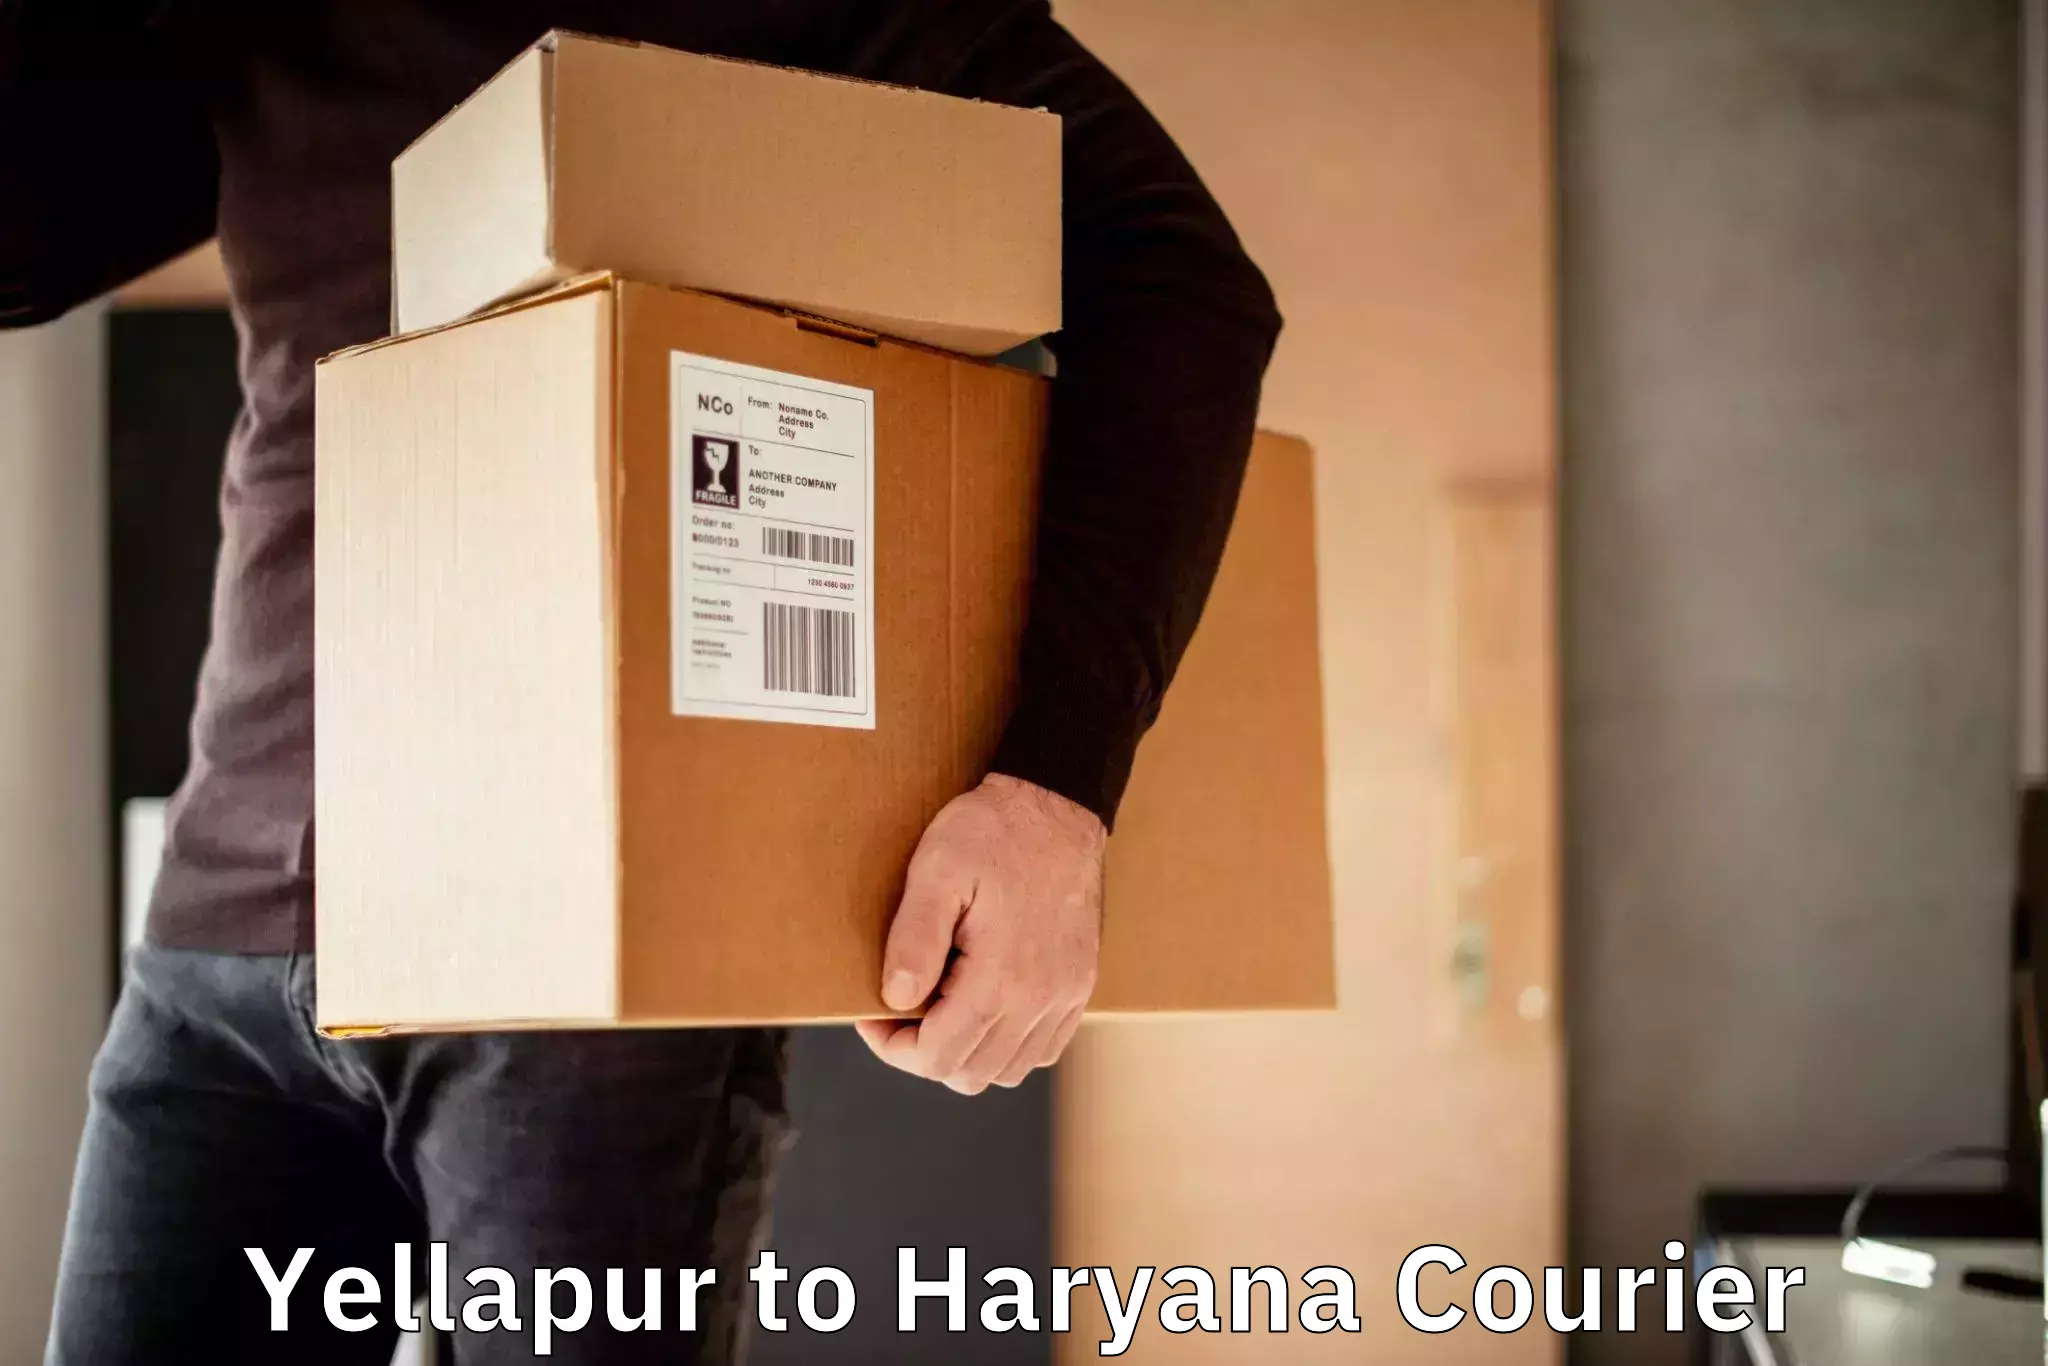 Corporate courier solutions Yellapur to Chaudhary Charan Singh Haryana Agricultural University Hisar